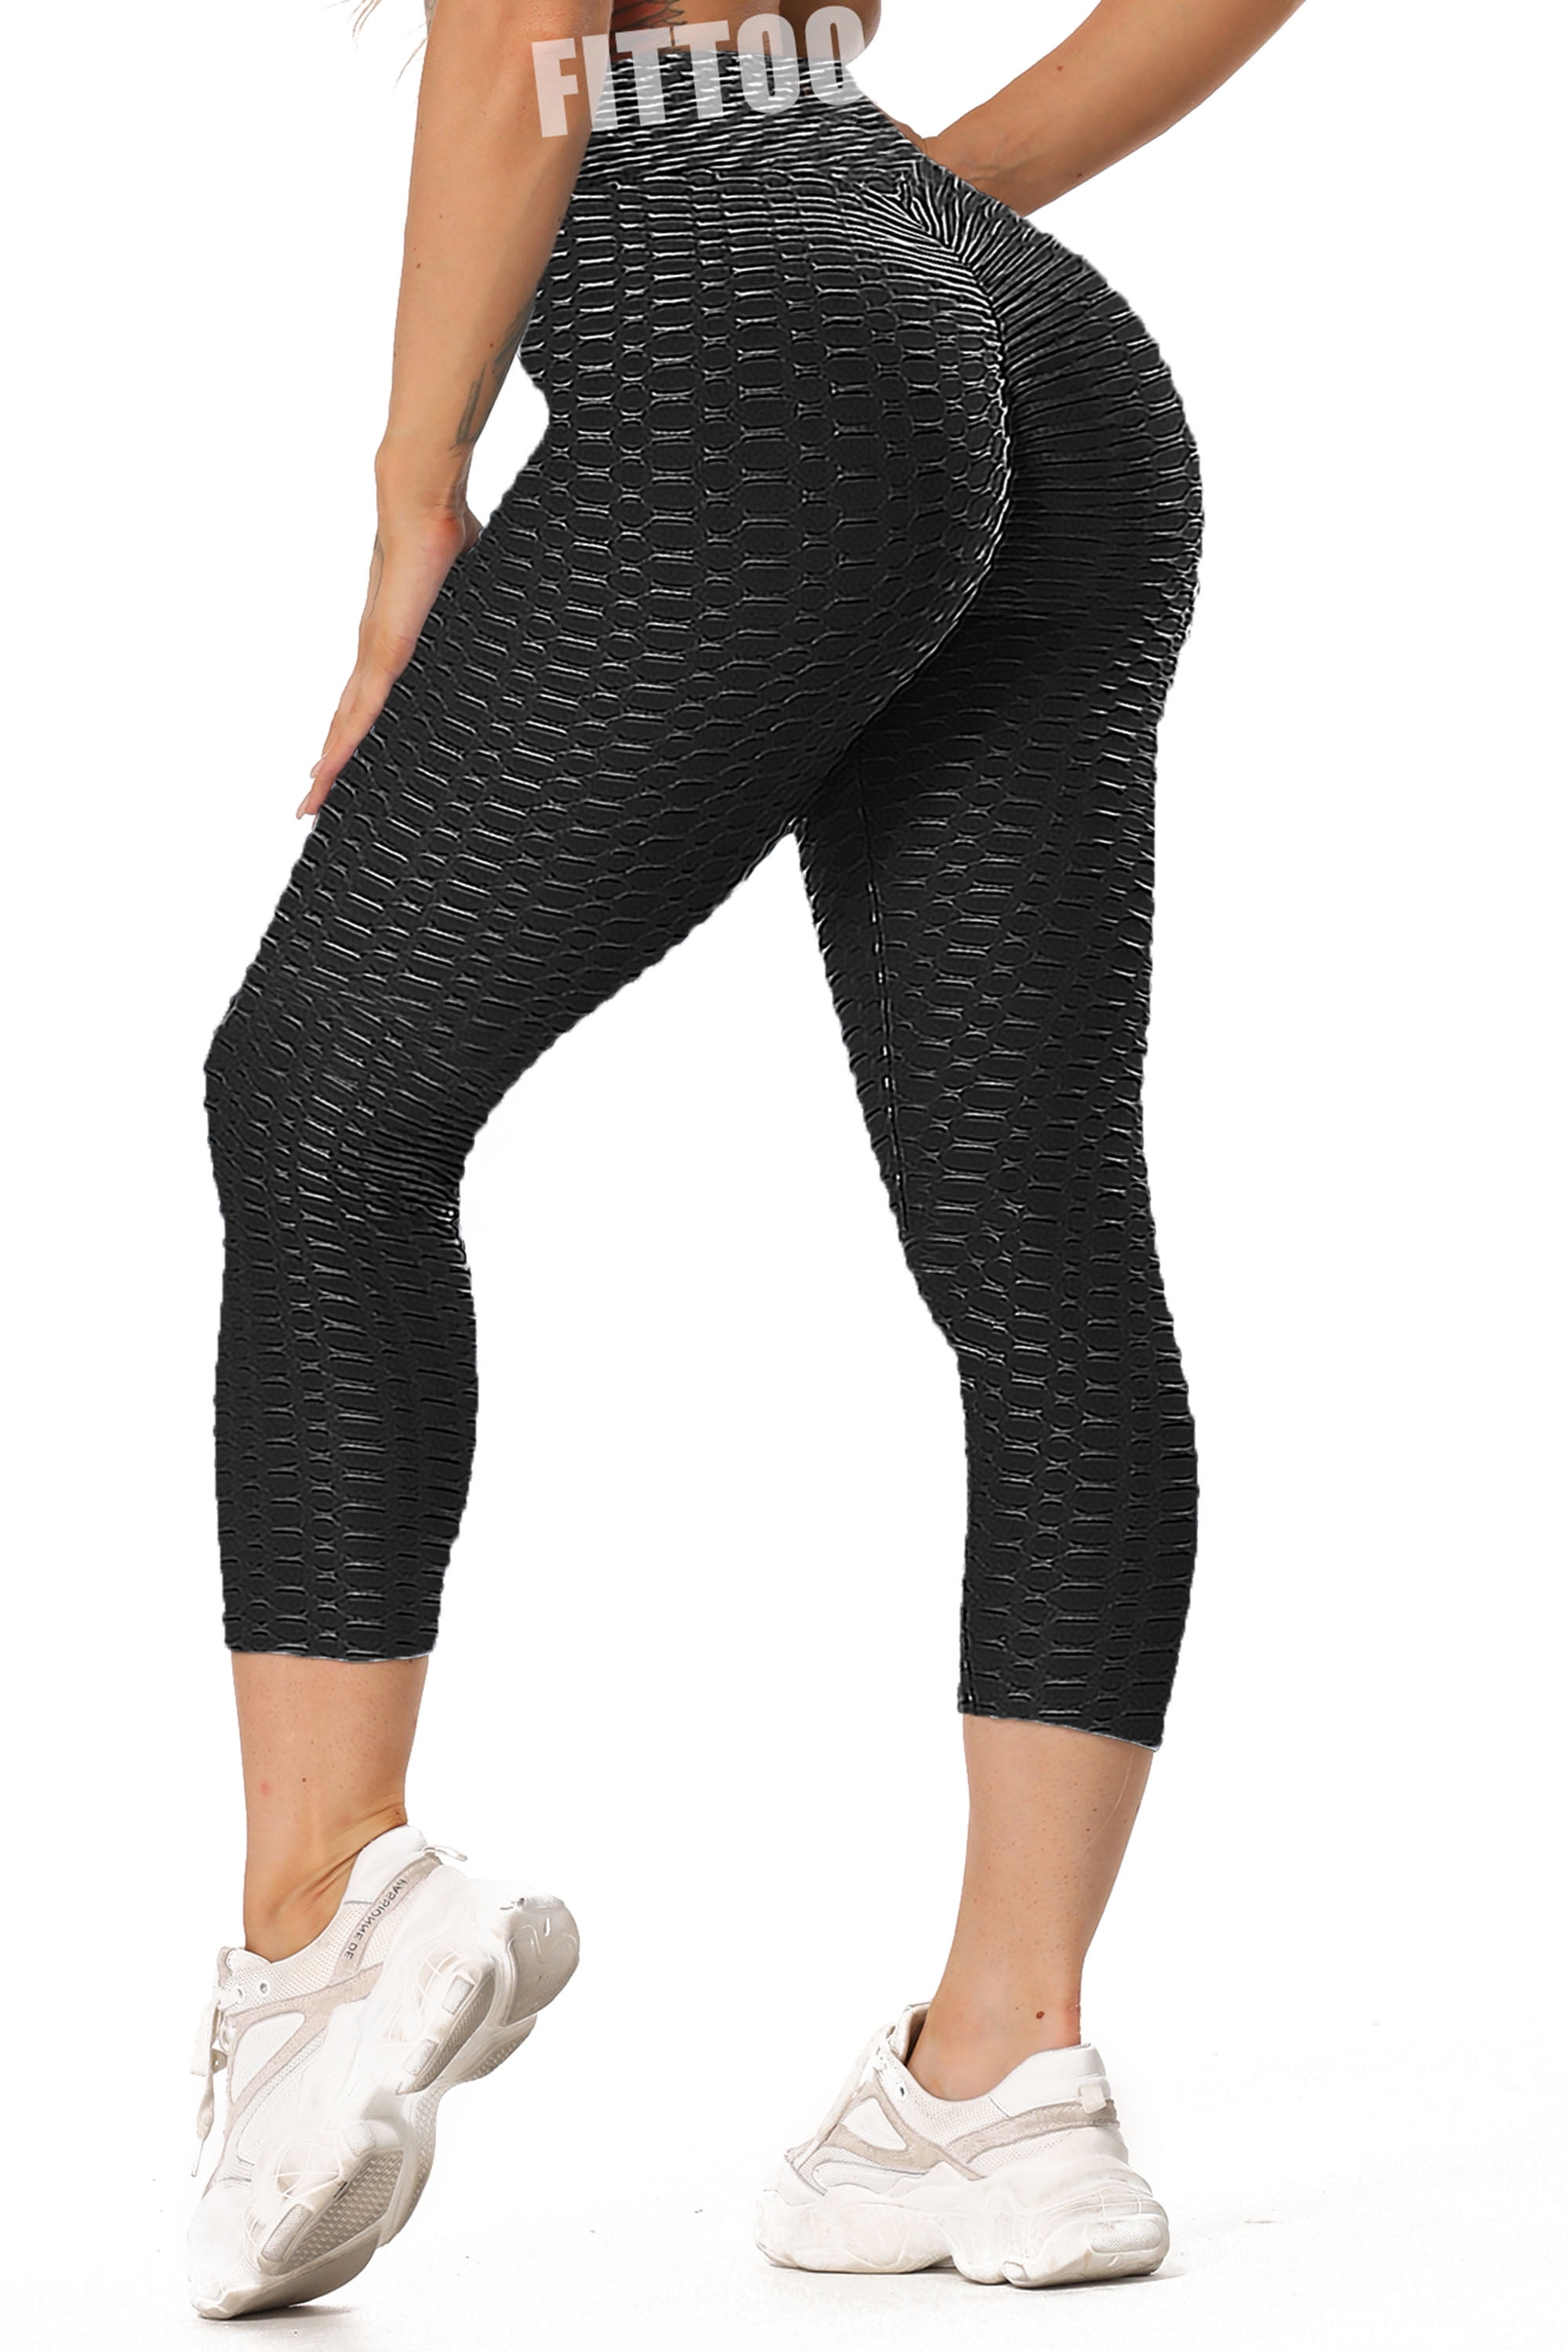 High Waist Tummy Control Stretchy Workout Leggings Textured Booty Tights Butt Lifting Yoga Pants for Women